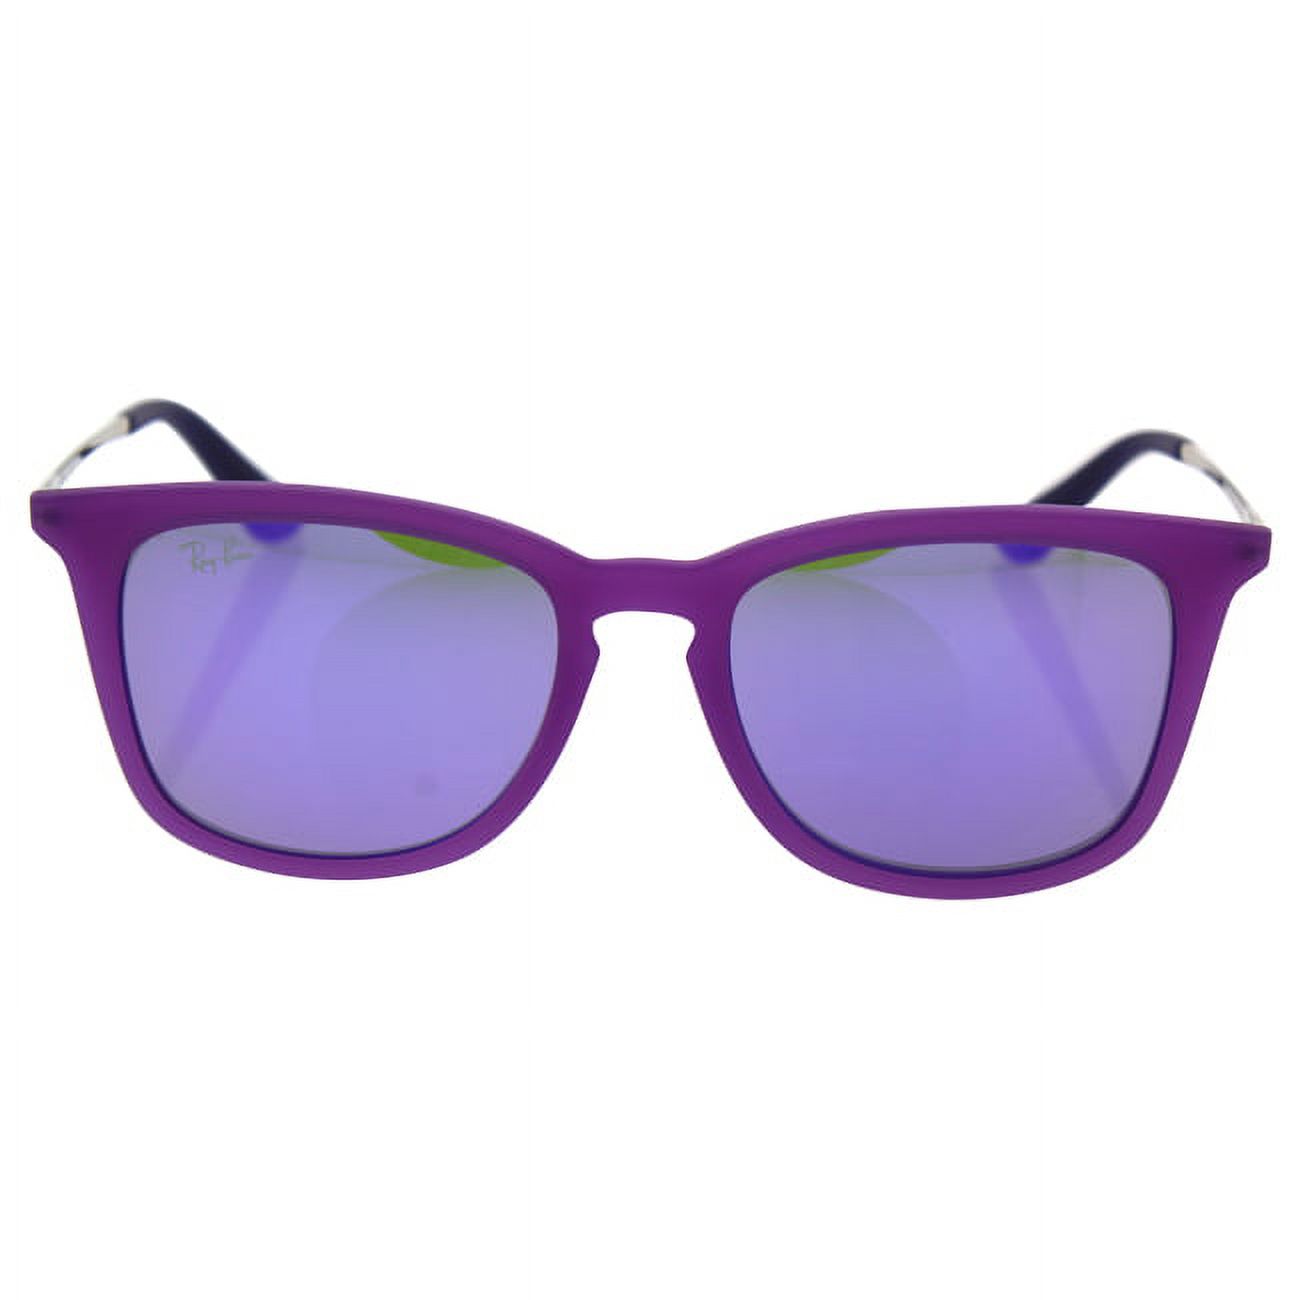 Ray-Ban Junior 0RJ9063S Square Sunglasses for Youth - Size 48 (Grey Mirror Violet) - image 1 of 4